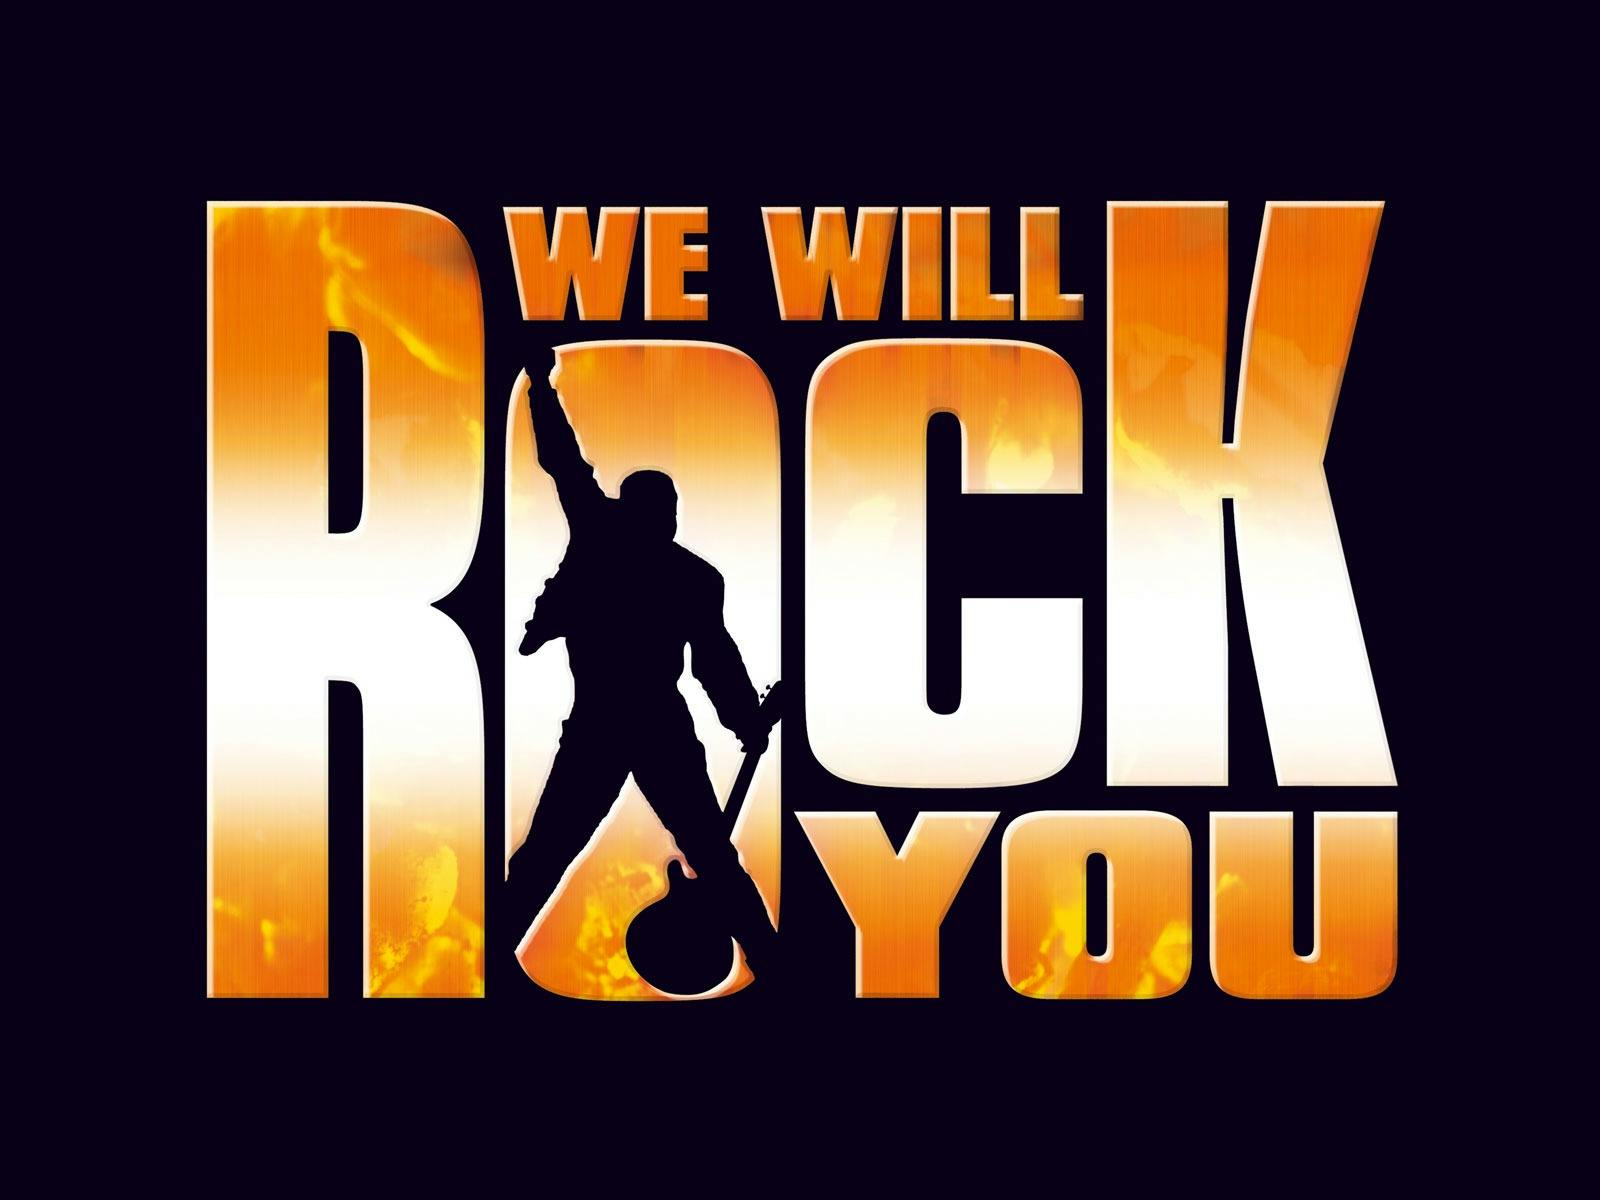 coach trips to we will rock you